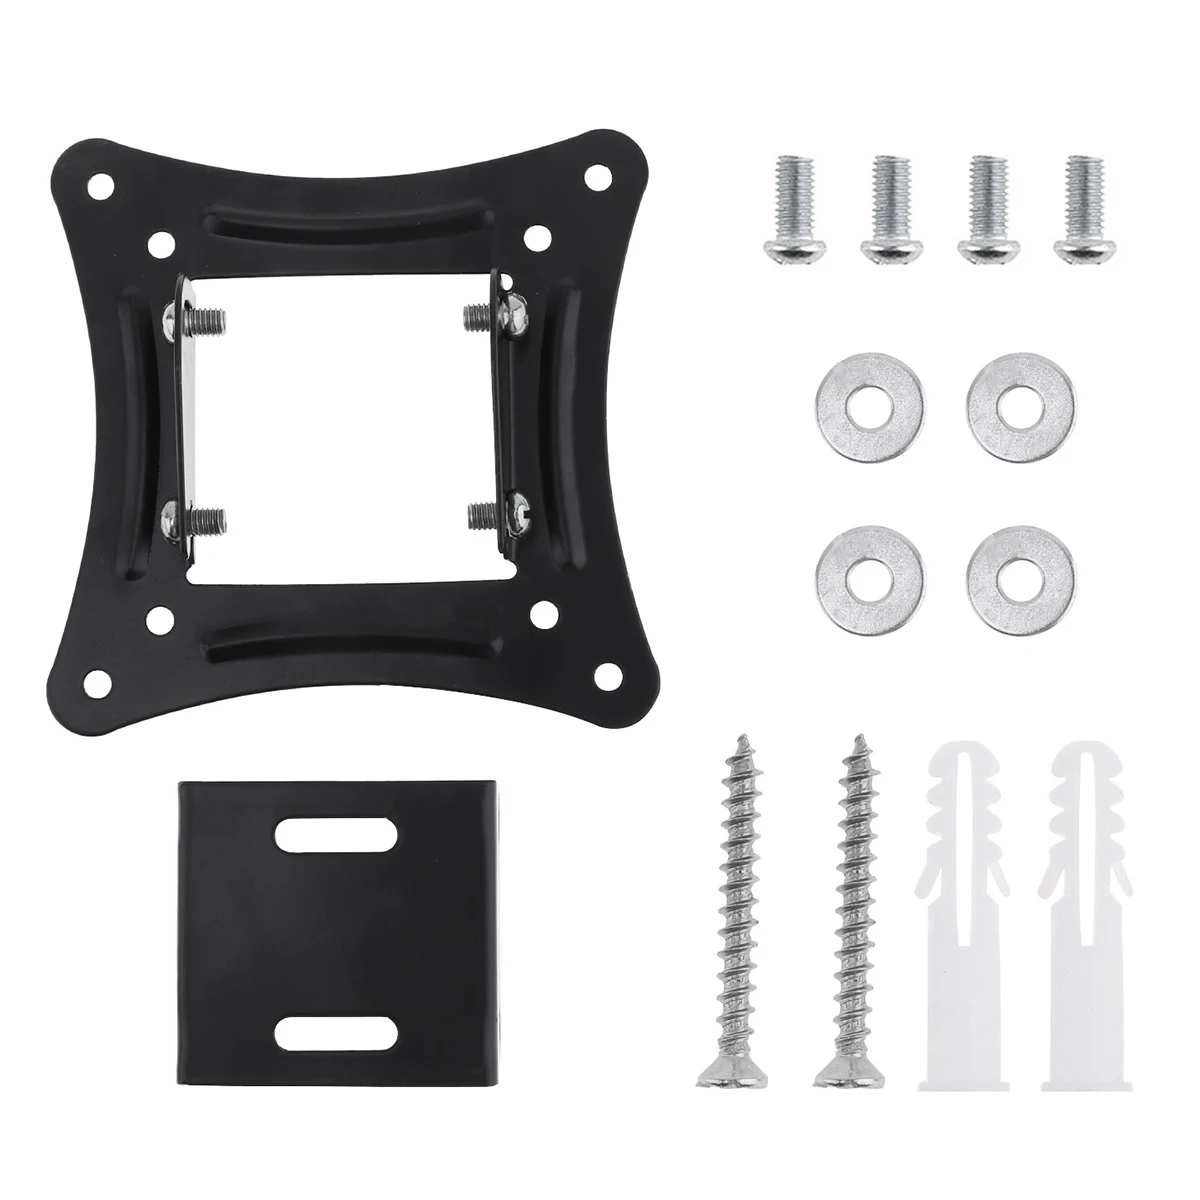 1 Pc Universal TV Wall Mount Bracket Fixed Flat Panel TV Frame Support 15 ° Tilt Fit for 14-26 Inch LED Screens Monitors